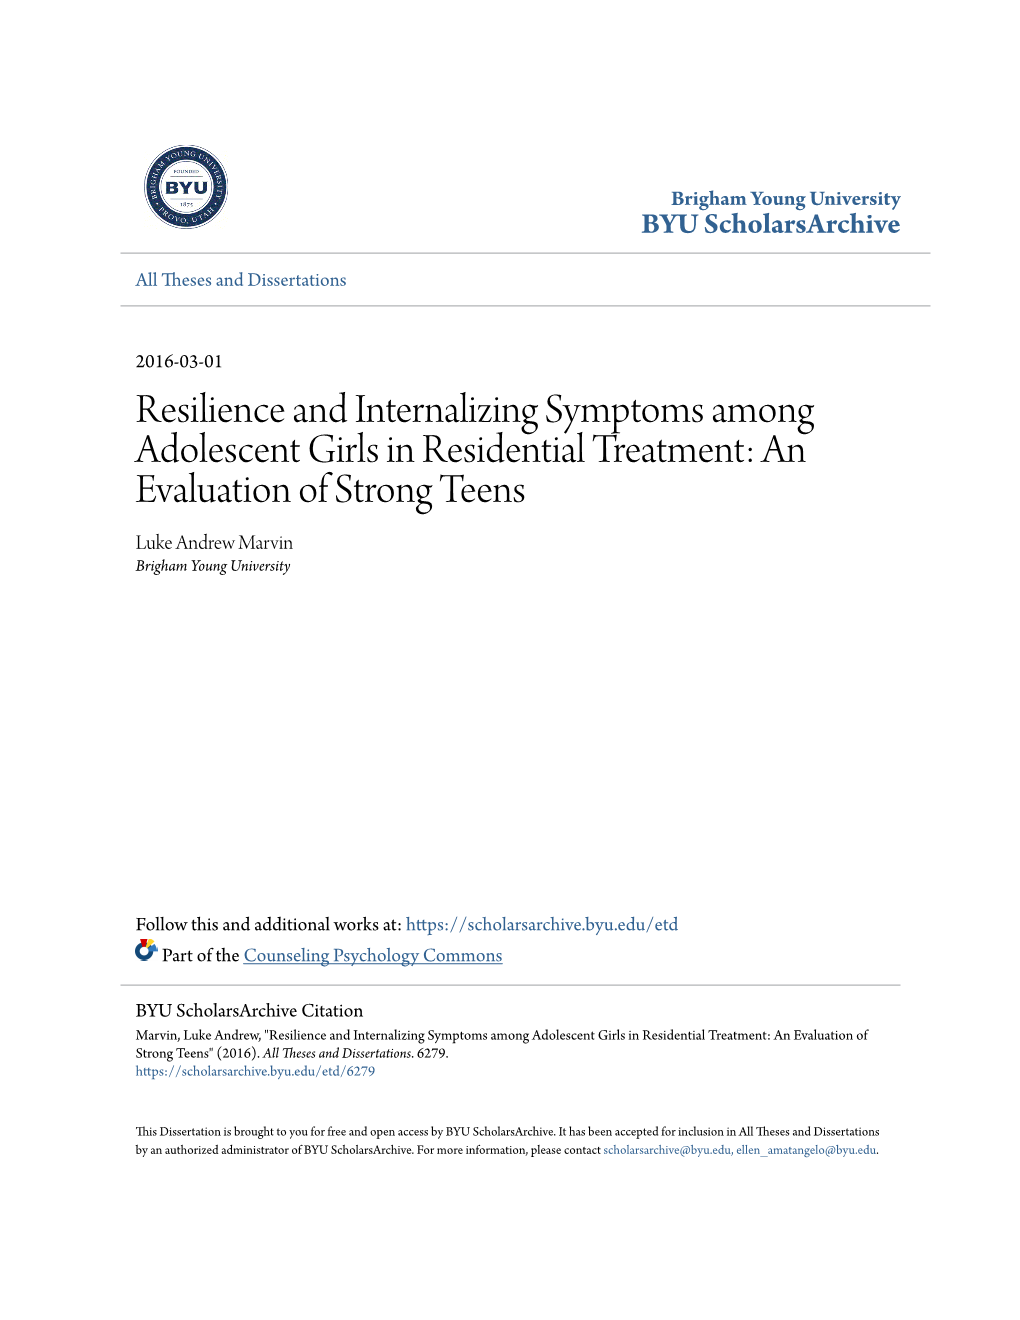 Resilience and Internalizing Symptoms Among Adolescent Girls in Residential Treatment: an Evaluation of Strong Teens Luke Andrew Marvin Brigham Young University